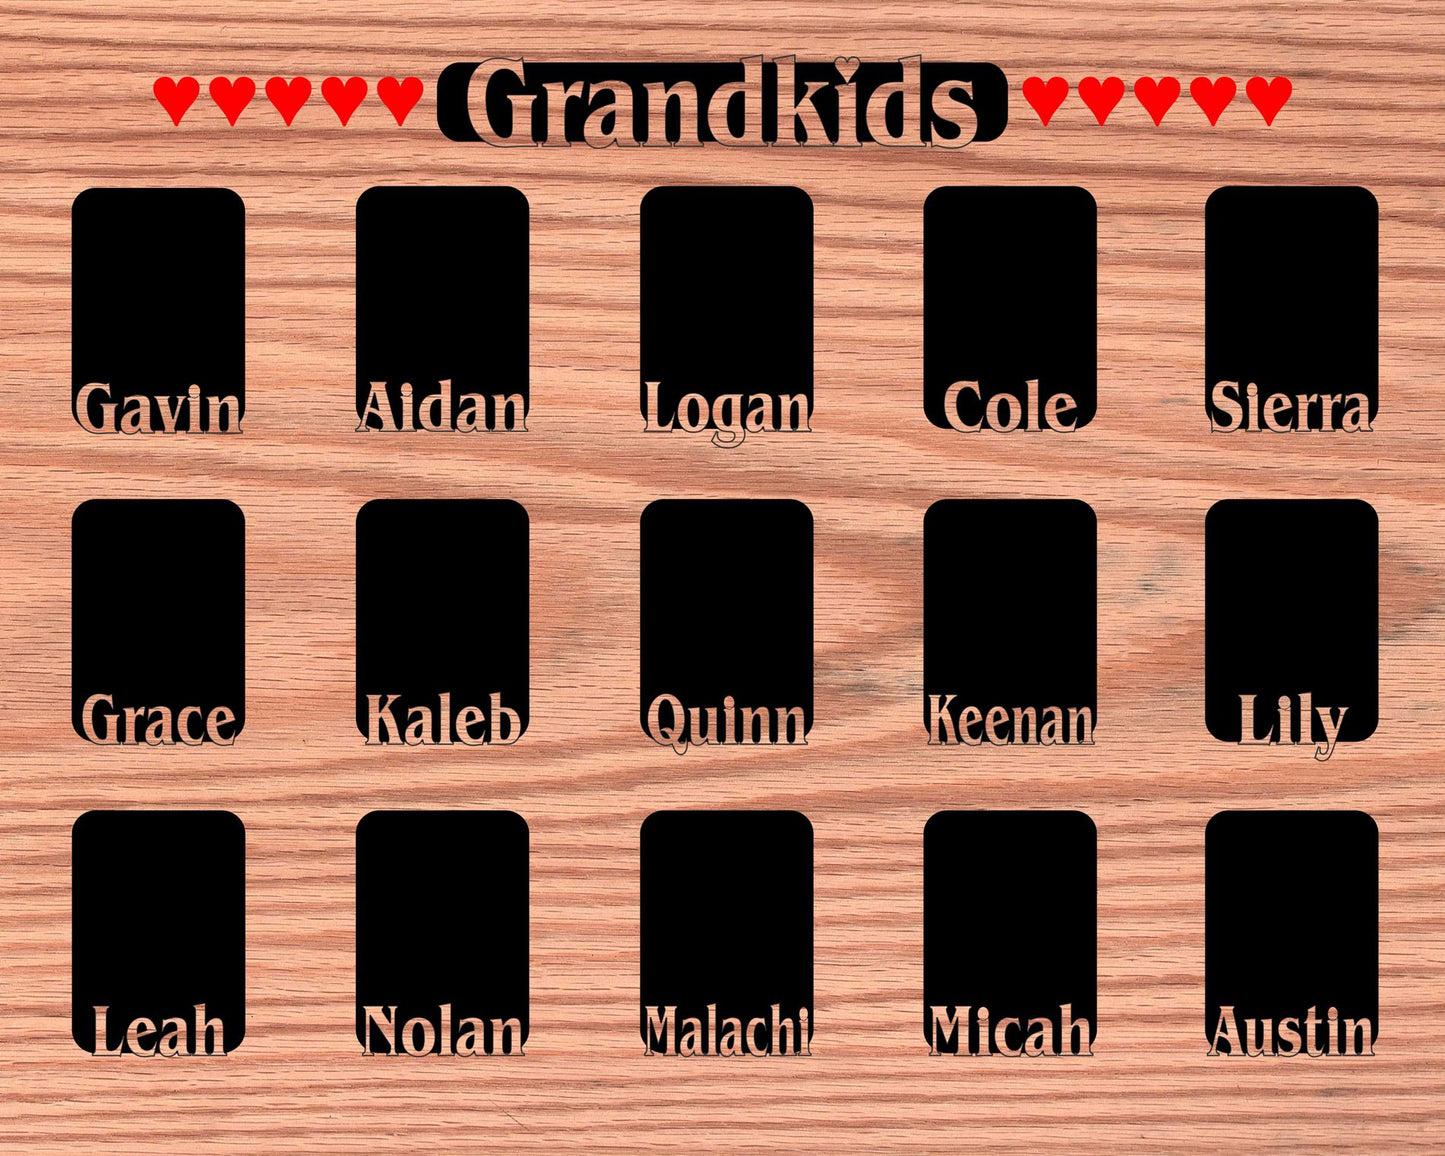 Grandkids Name Picture Frame 16"x20"